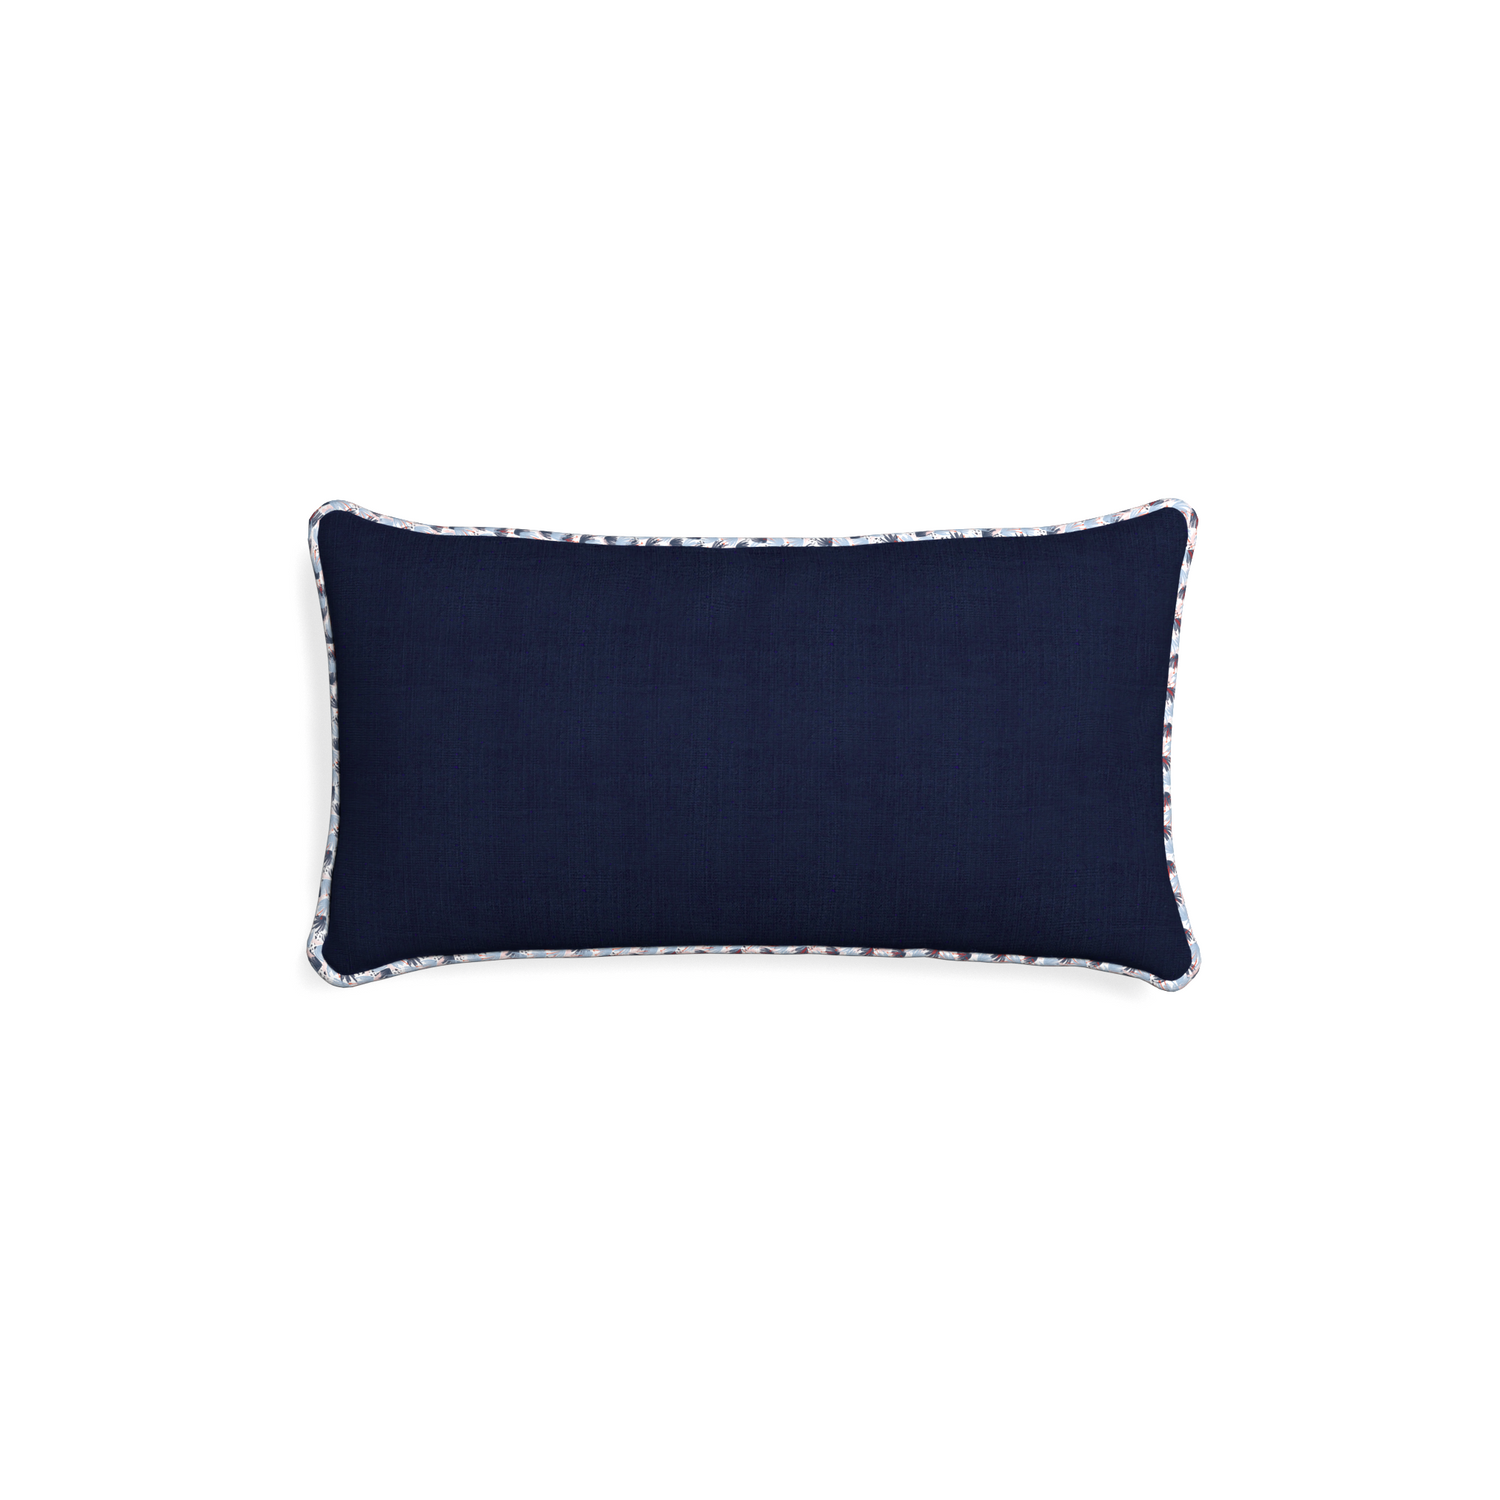 Petite-lumbar midnight custom navy bluepillow with e piping on white background